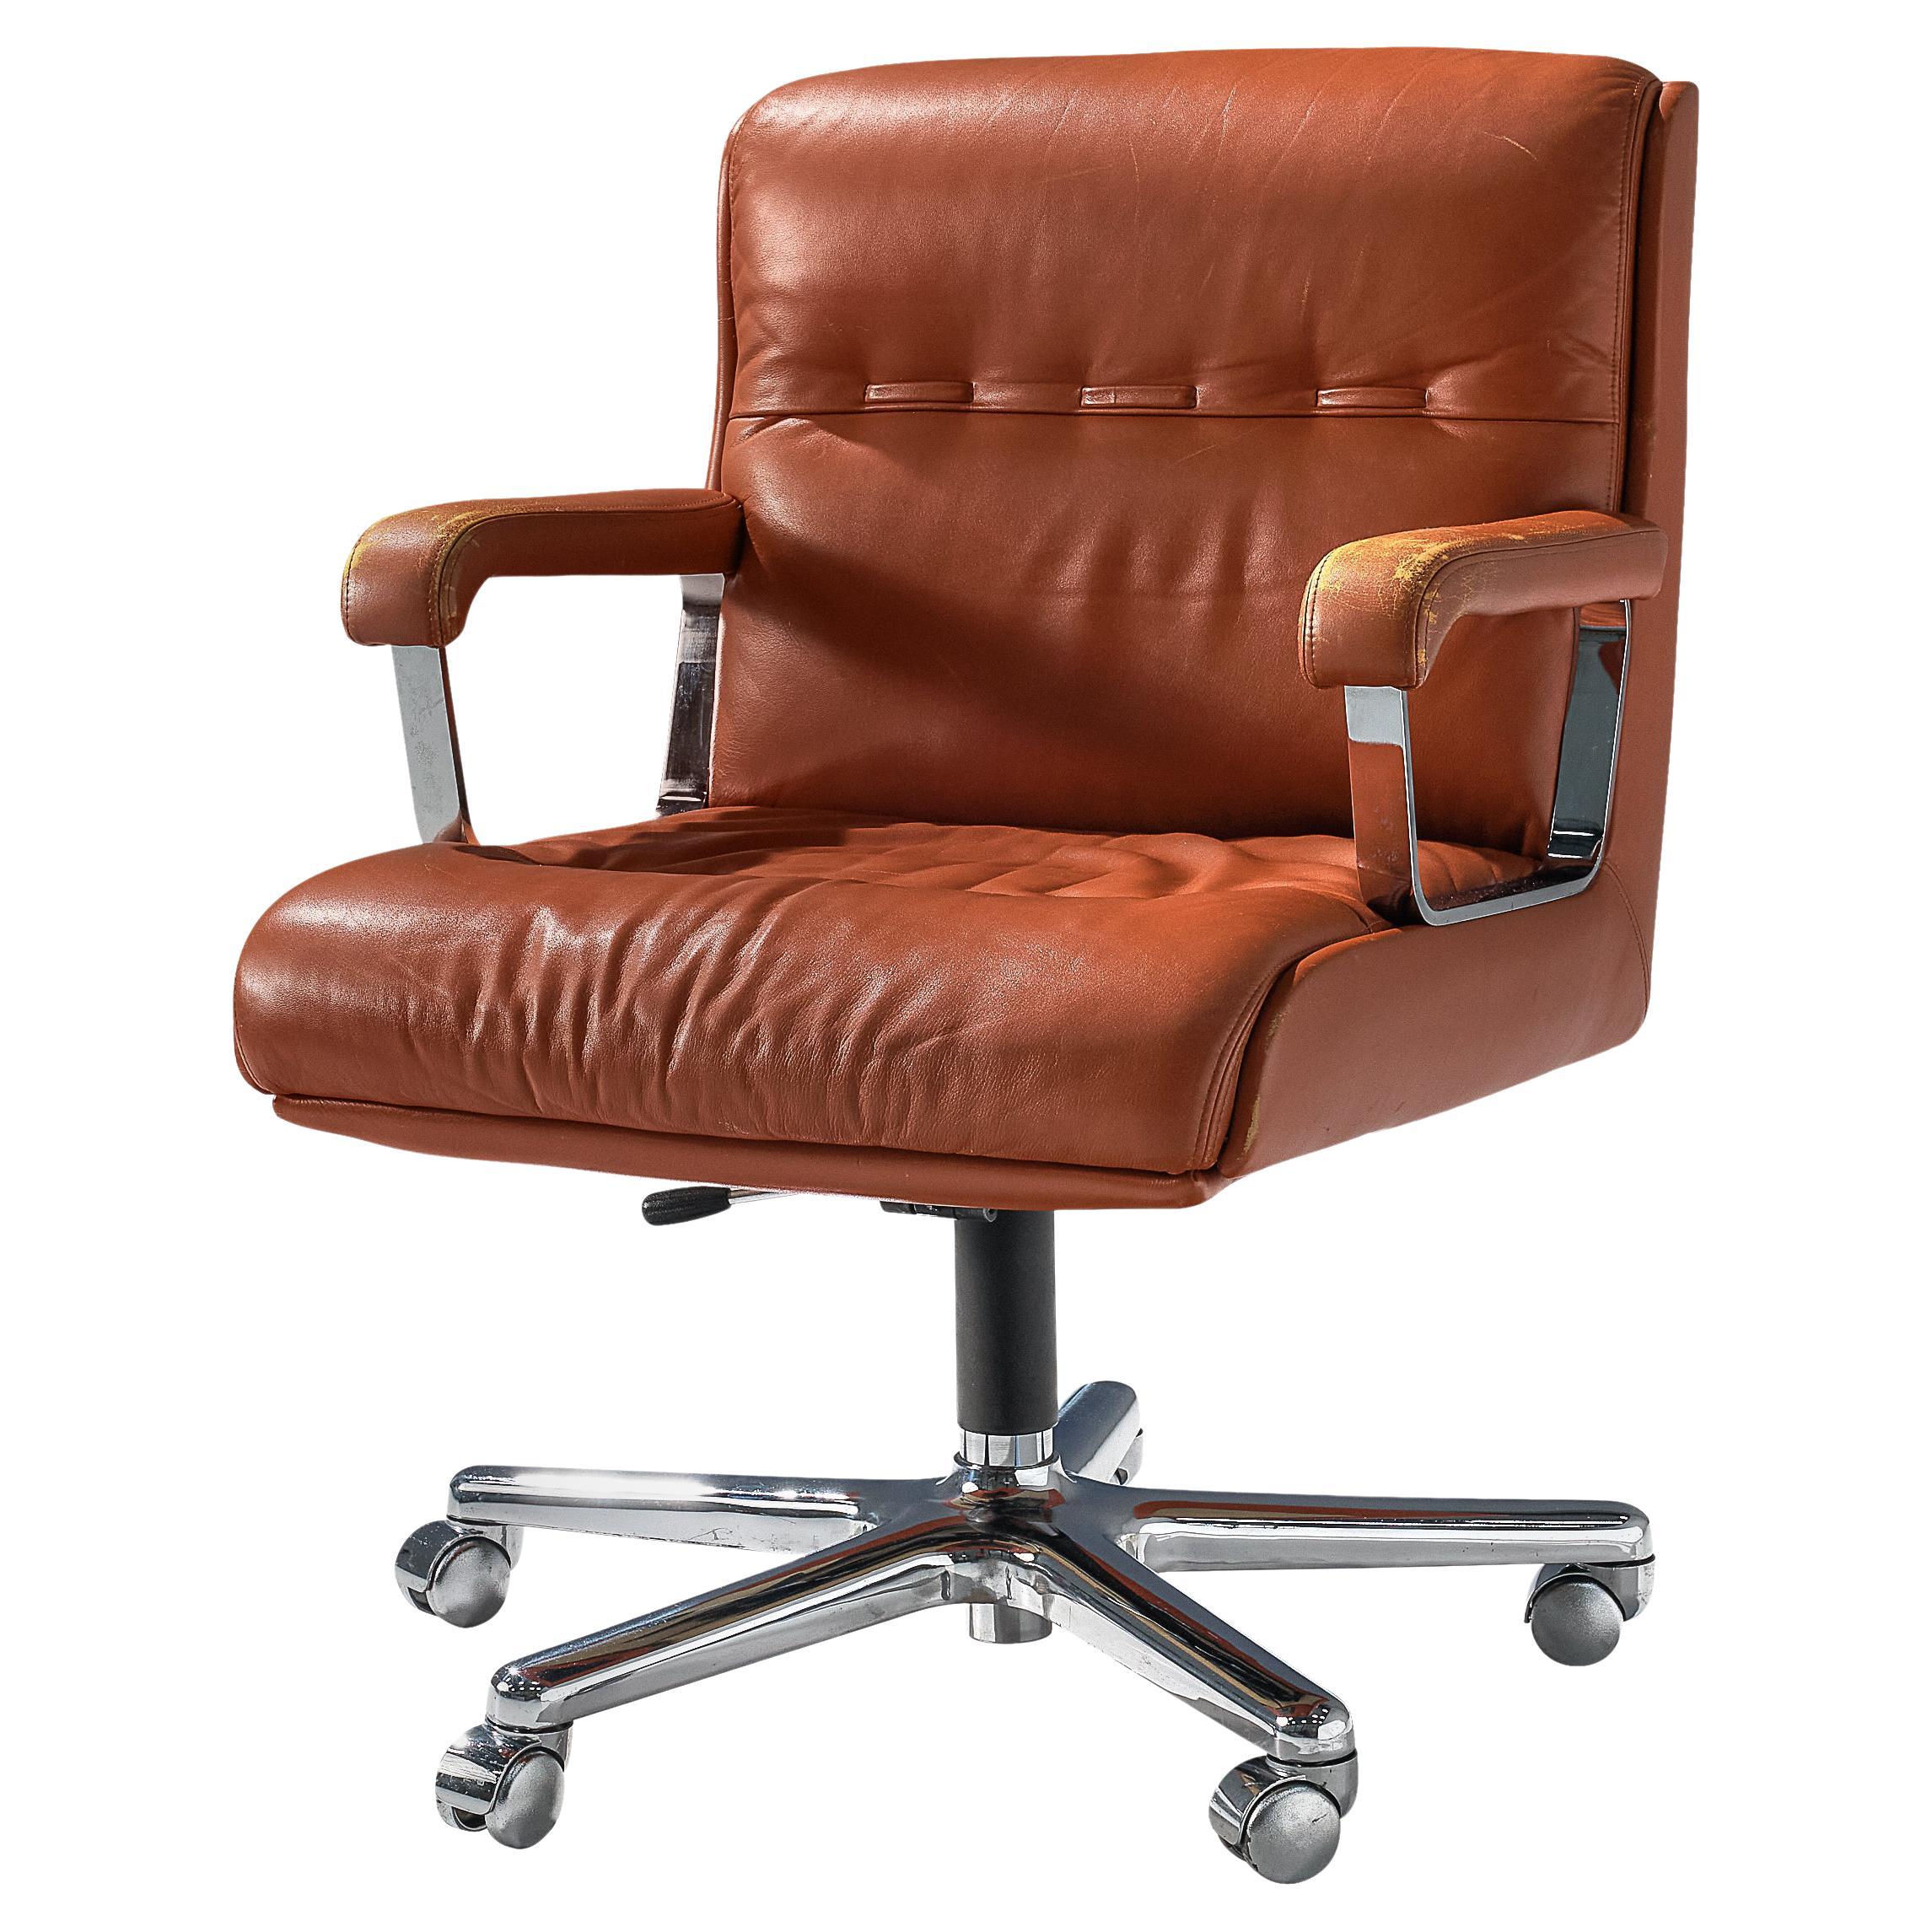 Norwegian Office Chair in Terracotta Leather For Sale at 1stDibs |  terracotta desk chair, terracotta office chair